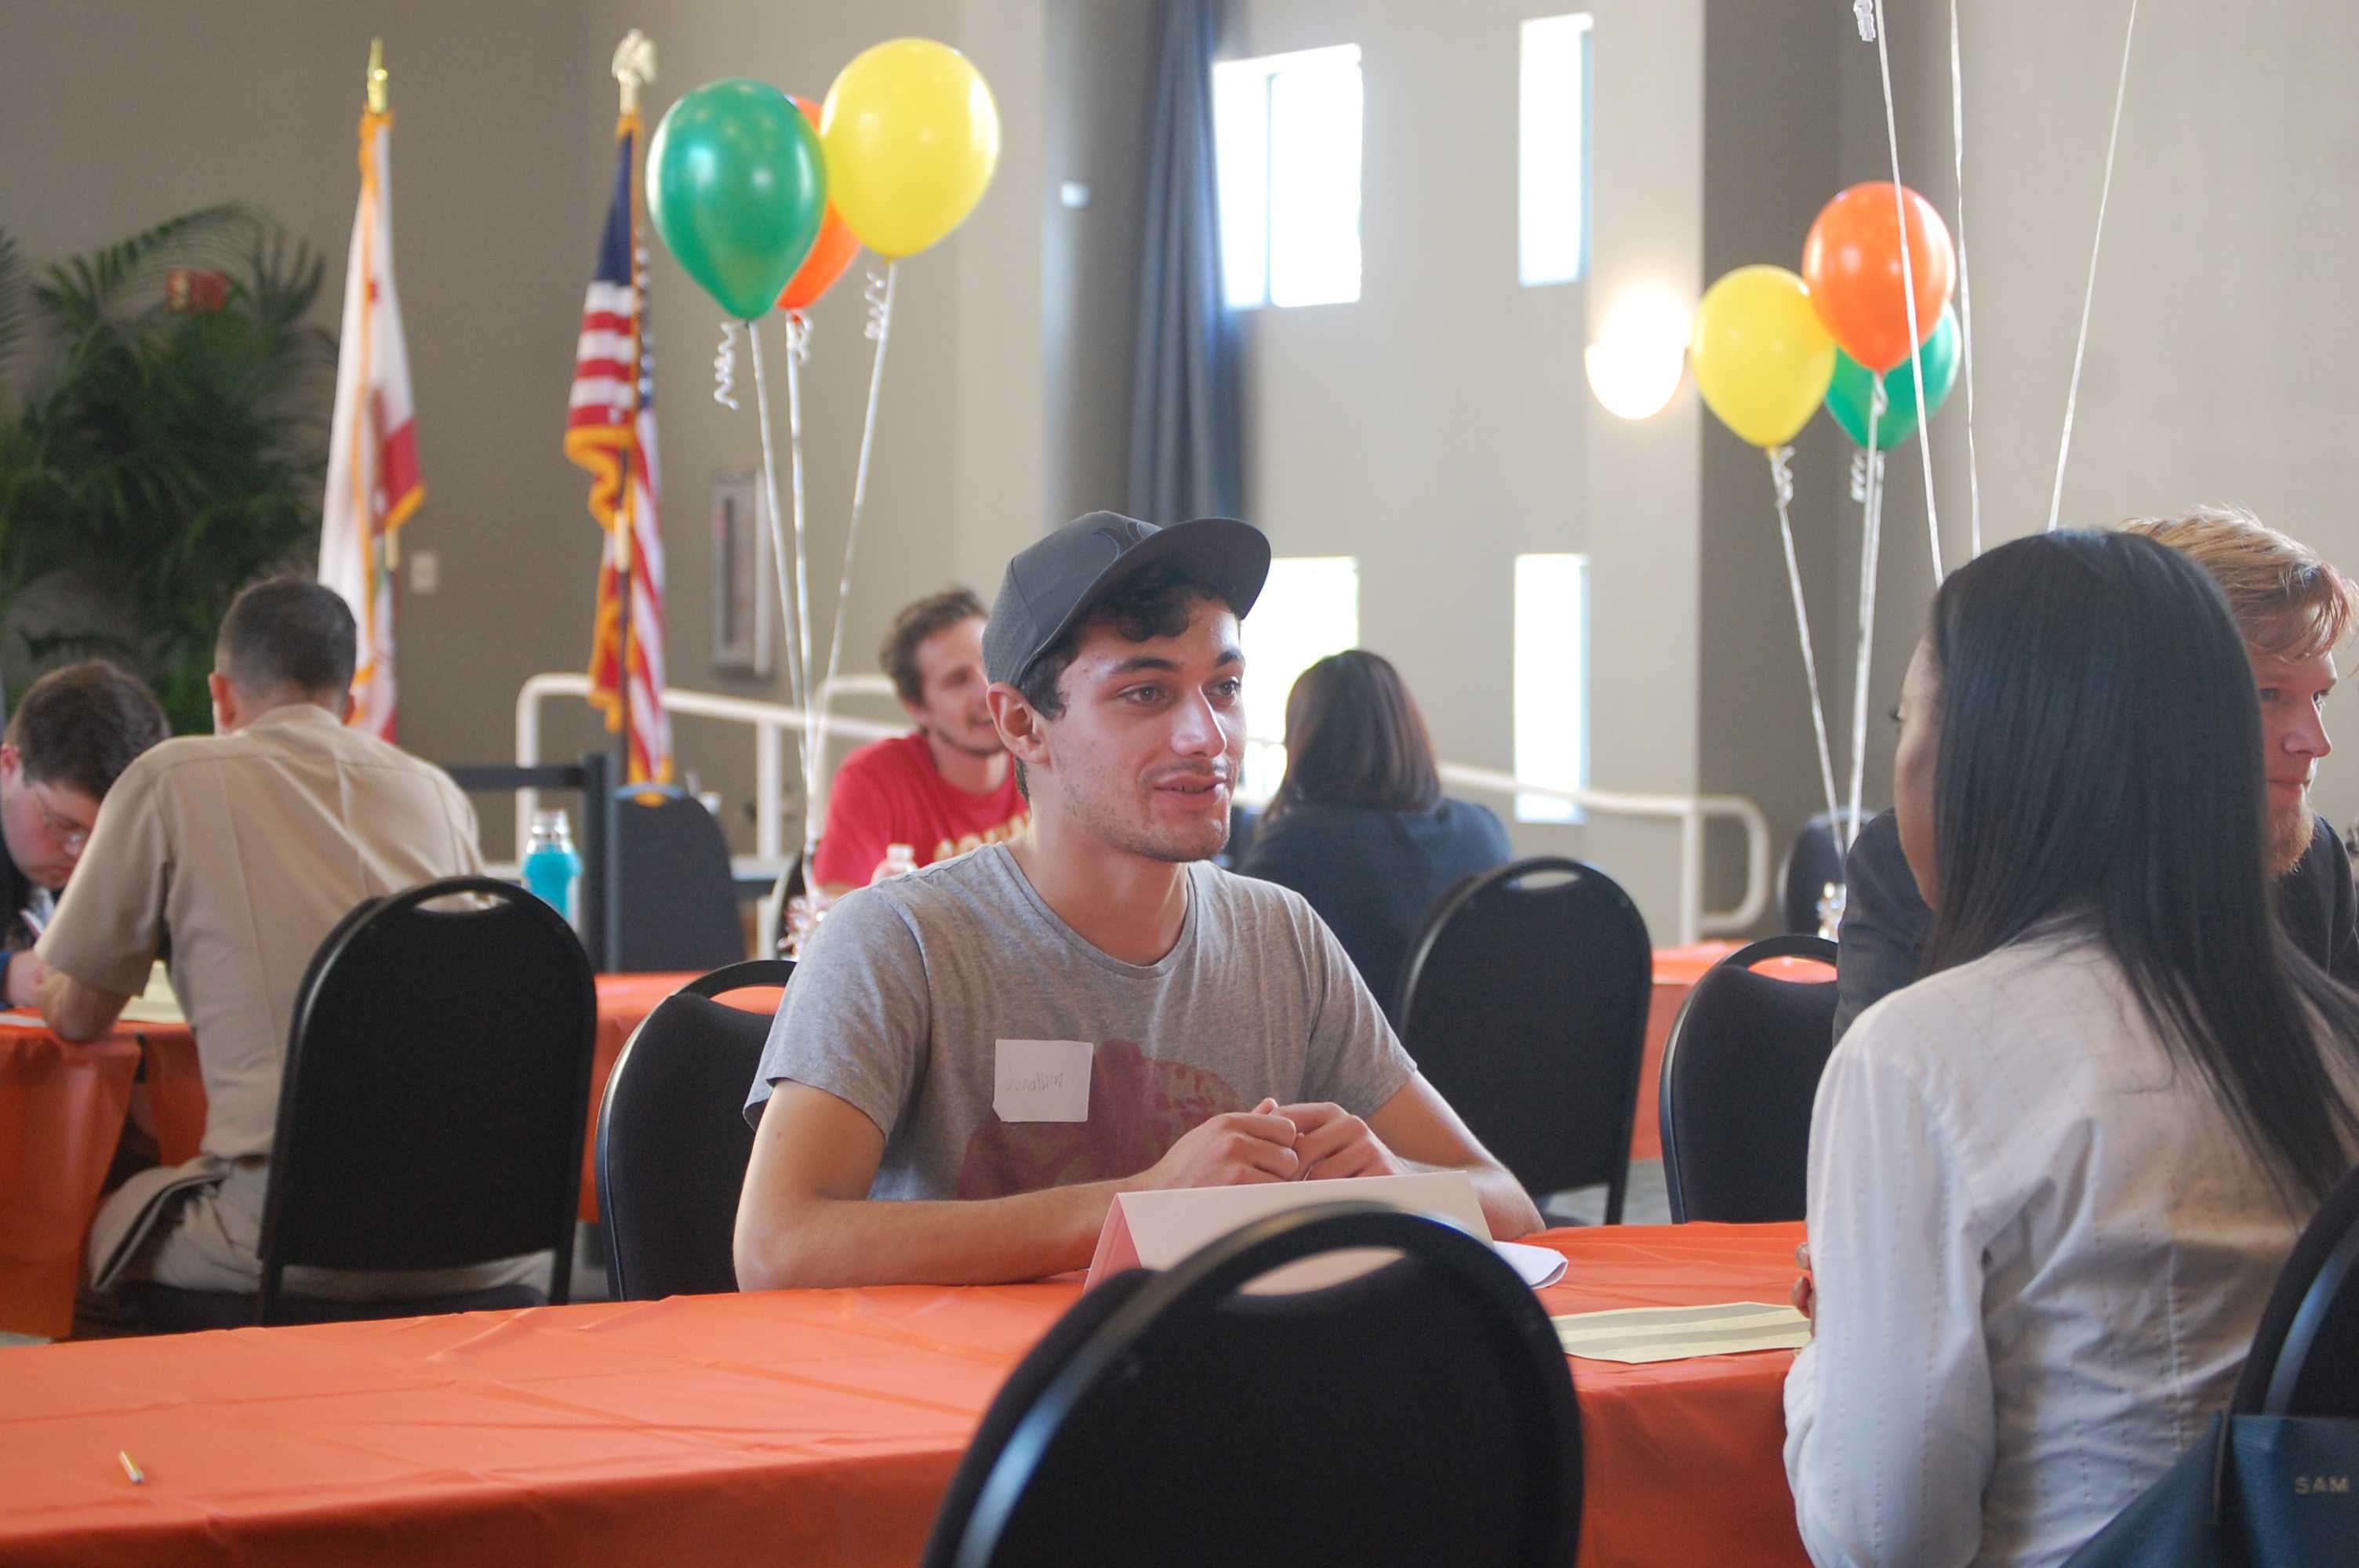 Jonathon Bassey gets critiqued by an employer on his interview skills, October 11, 2016 at The Grand Salon, CSUN. Bassey was one of many students to take advantage of the skills workshop. (Max Zeronian/The Sundial) Photo credit: Max Zeronian